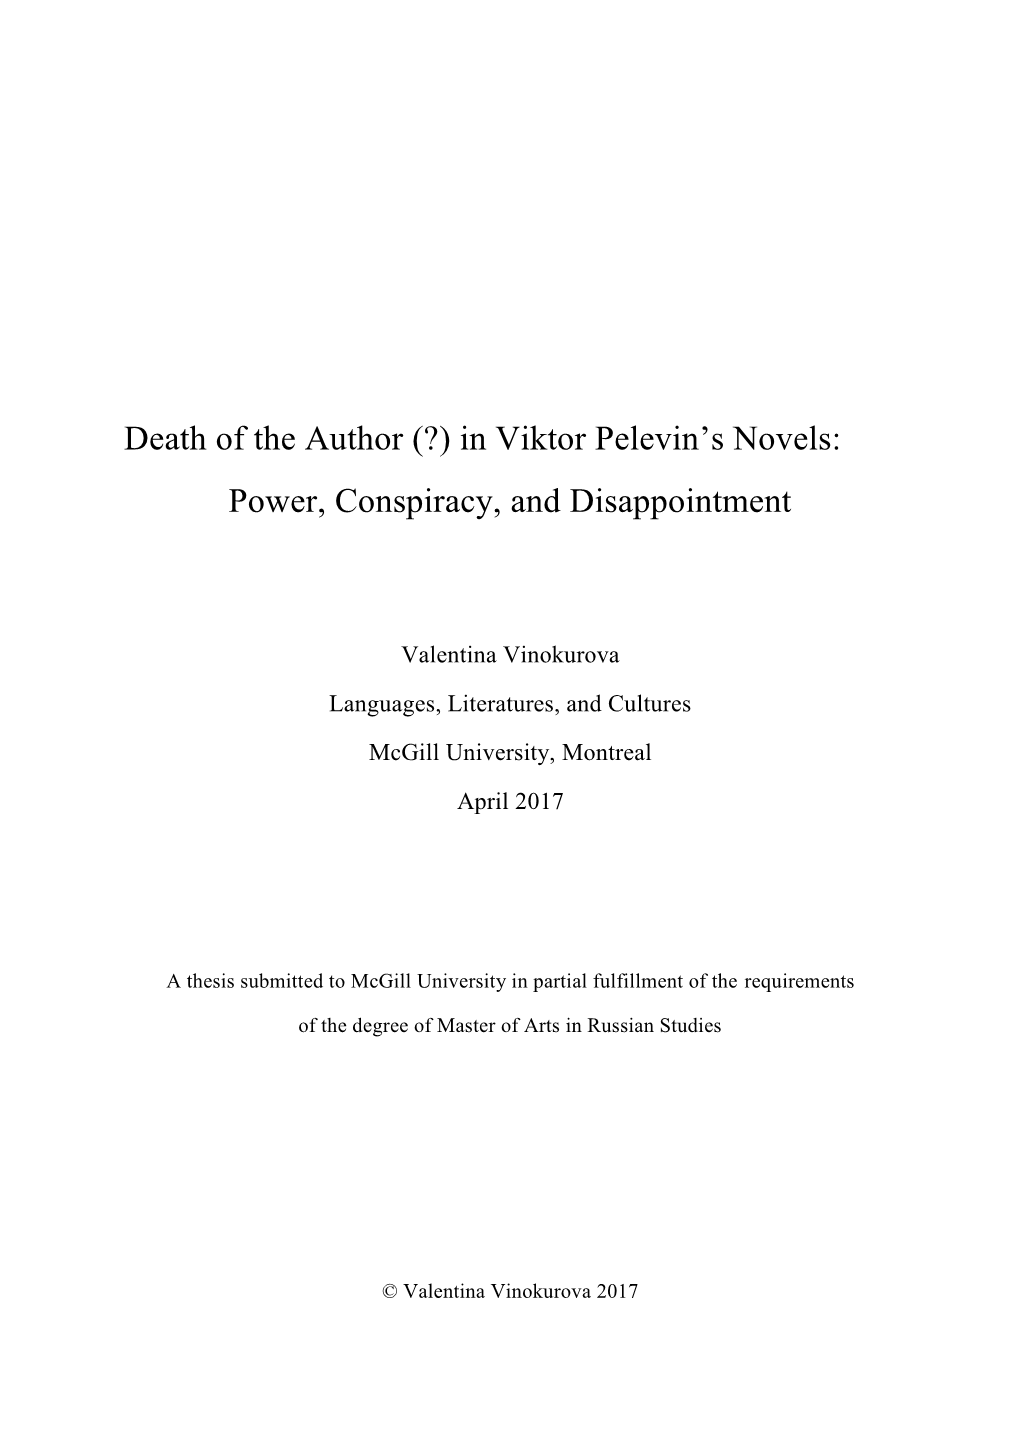 Death of the Author (?) in Viktor Pelevin's Novels